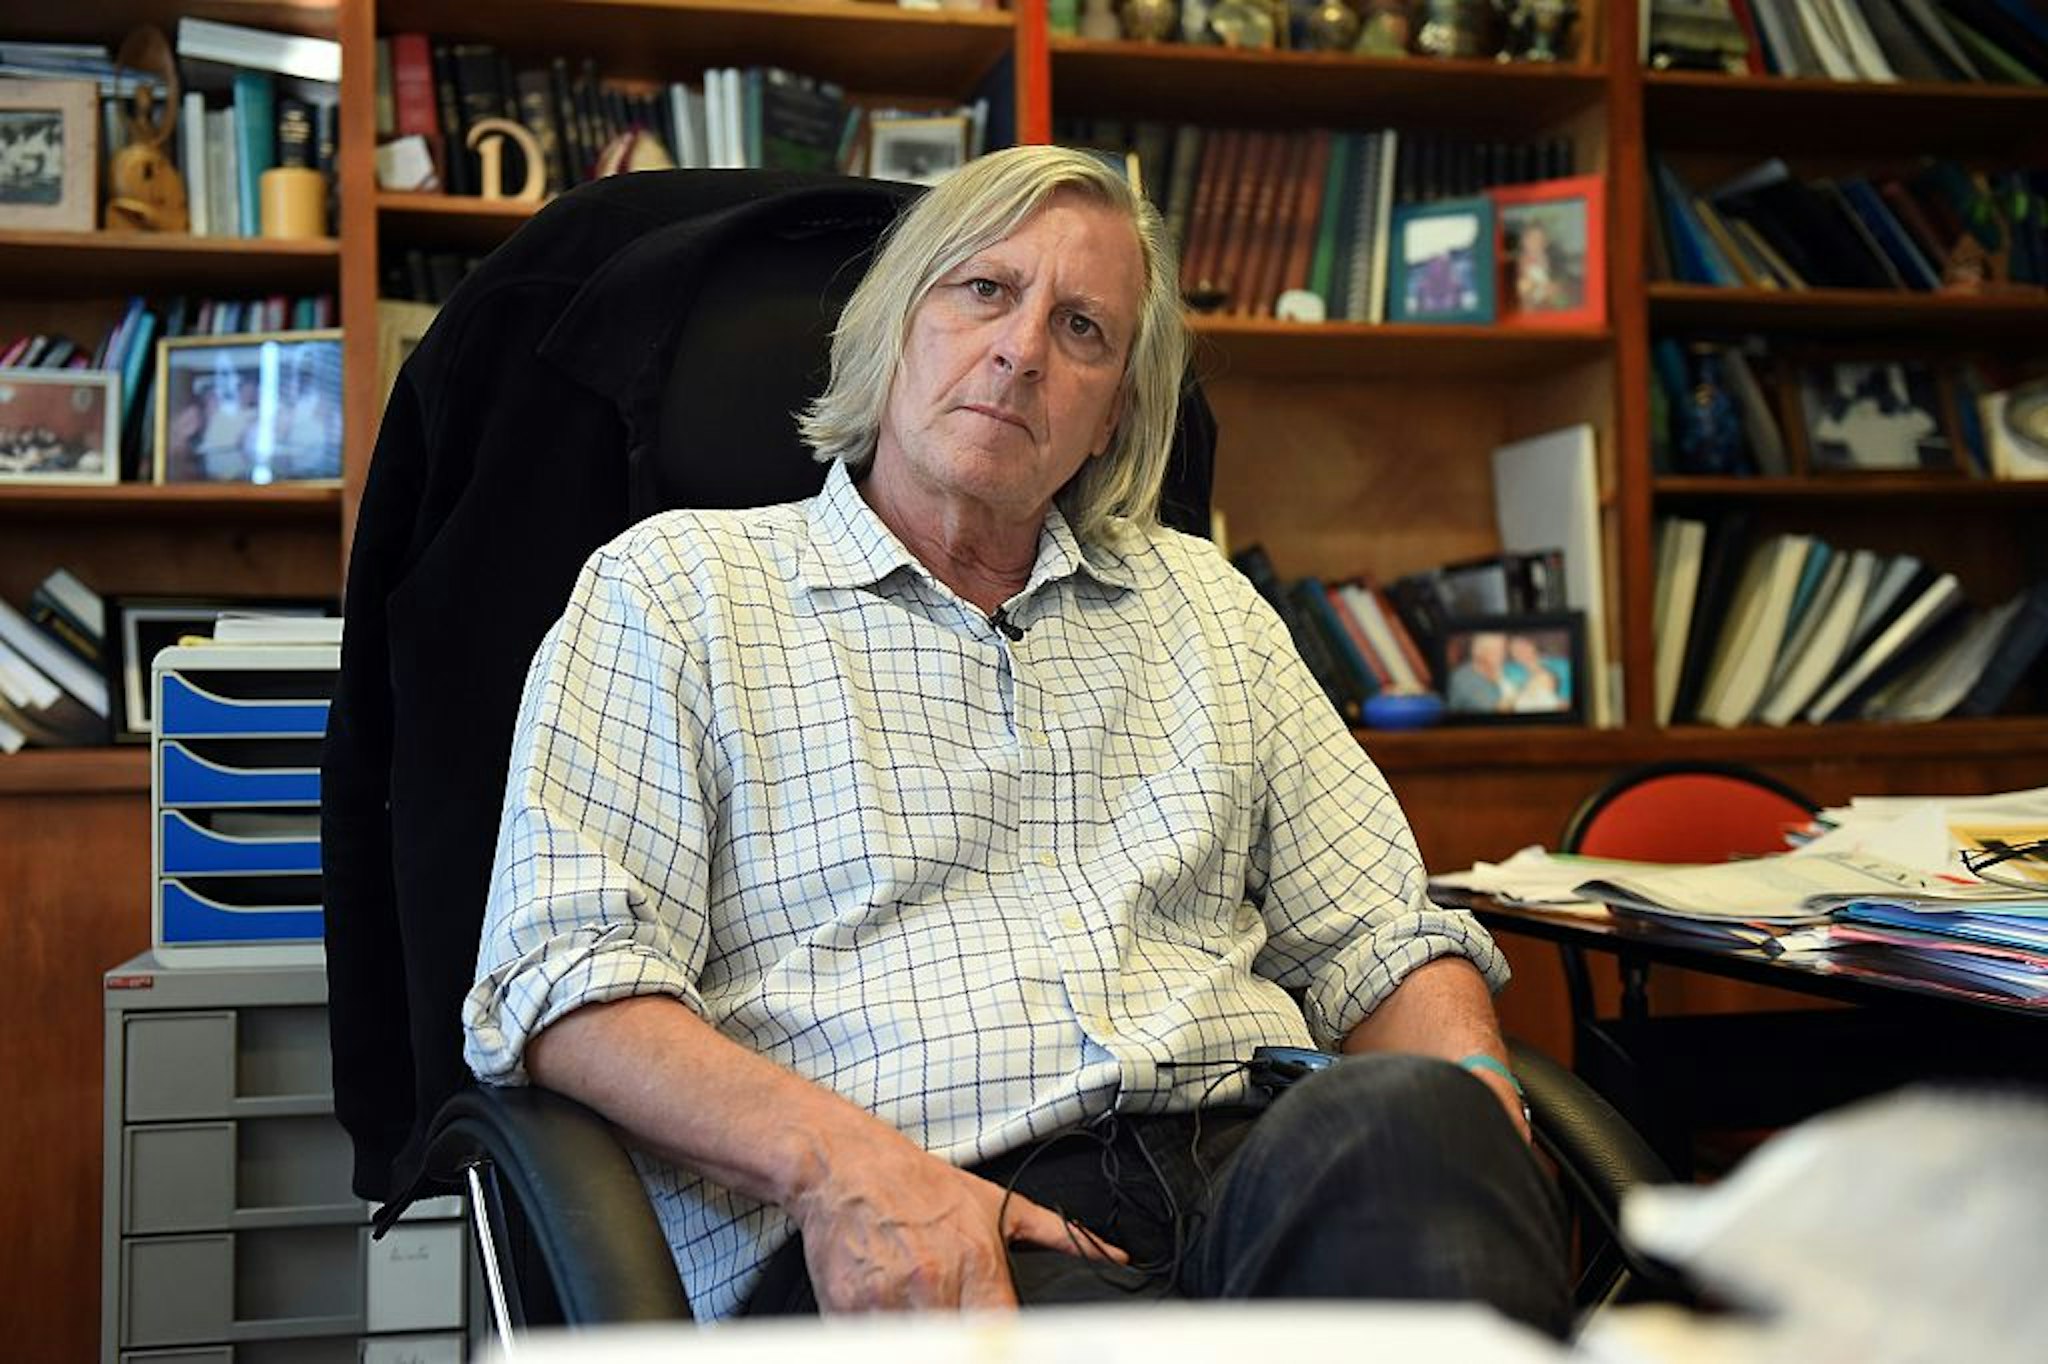 Didier Raoult, Professor at the Faculty of Medicine of Marseille, poses on November 6, 2014 in his office at the Facutly of Medicine in Marseille, southern France.